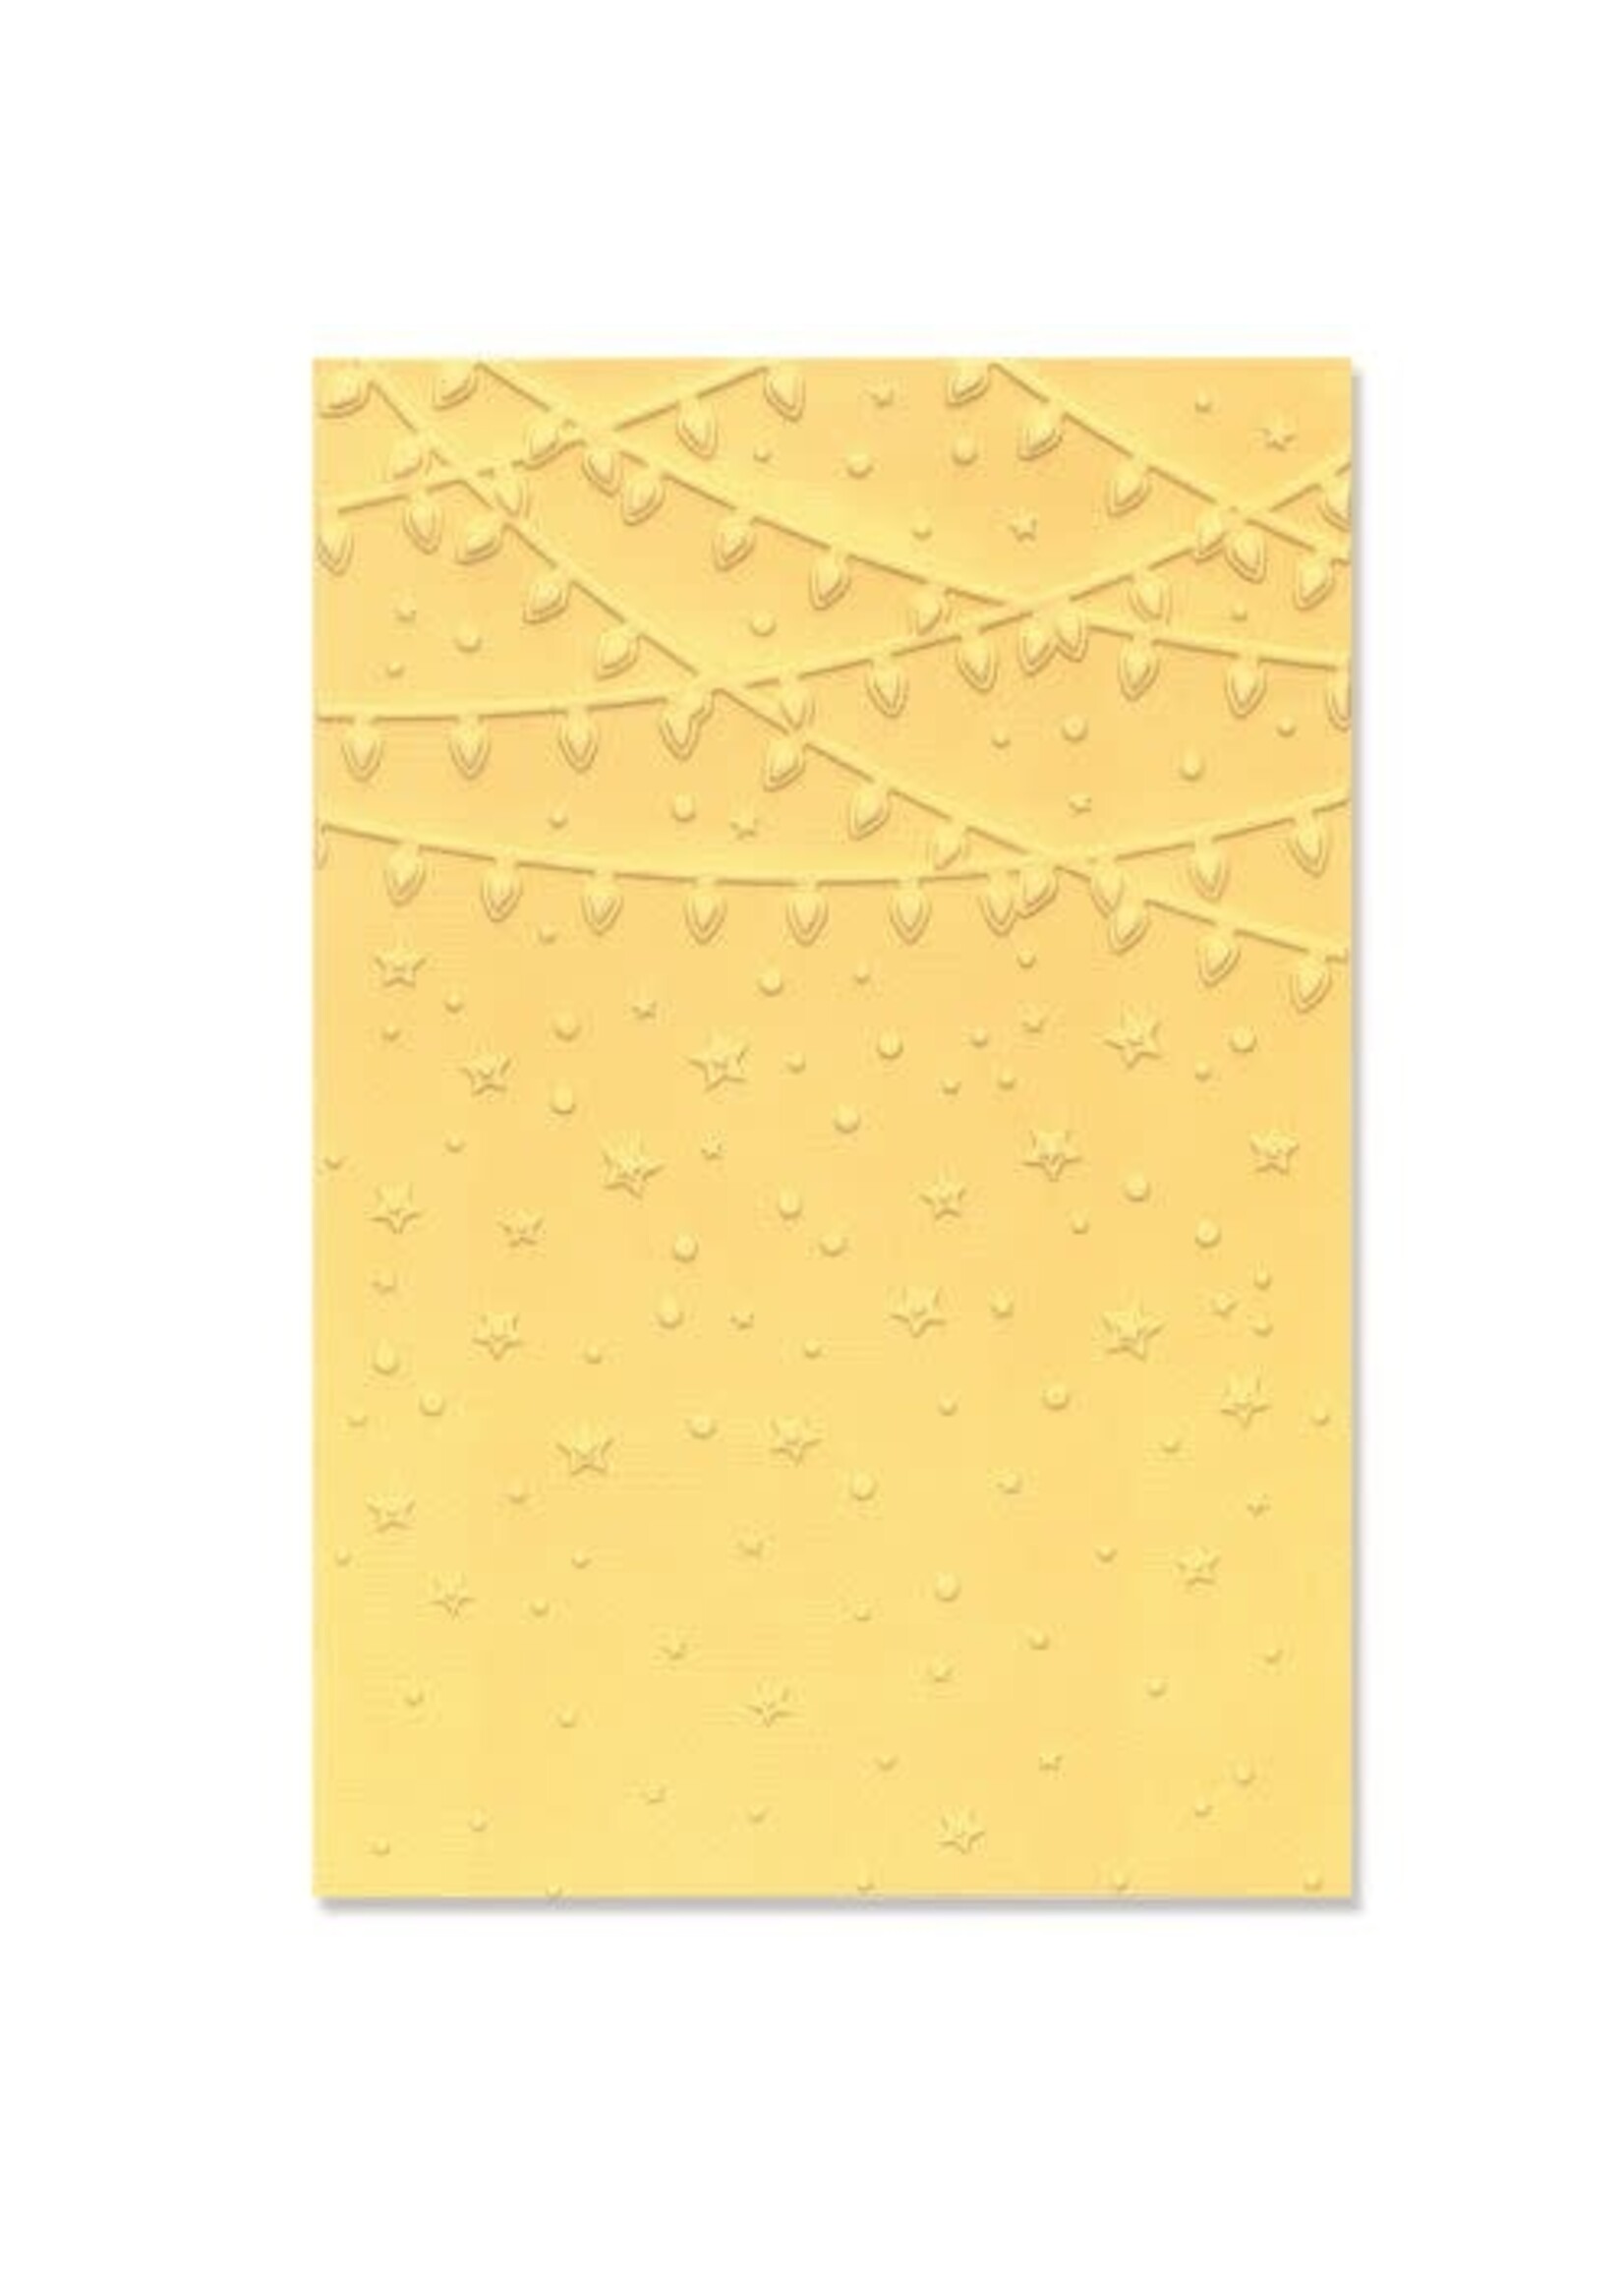 Sizzix Multi-Level Textured Impressions Embossing Folder Stars and Lights by Jennifer Ogborn